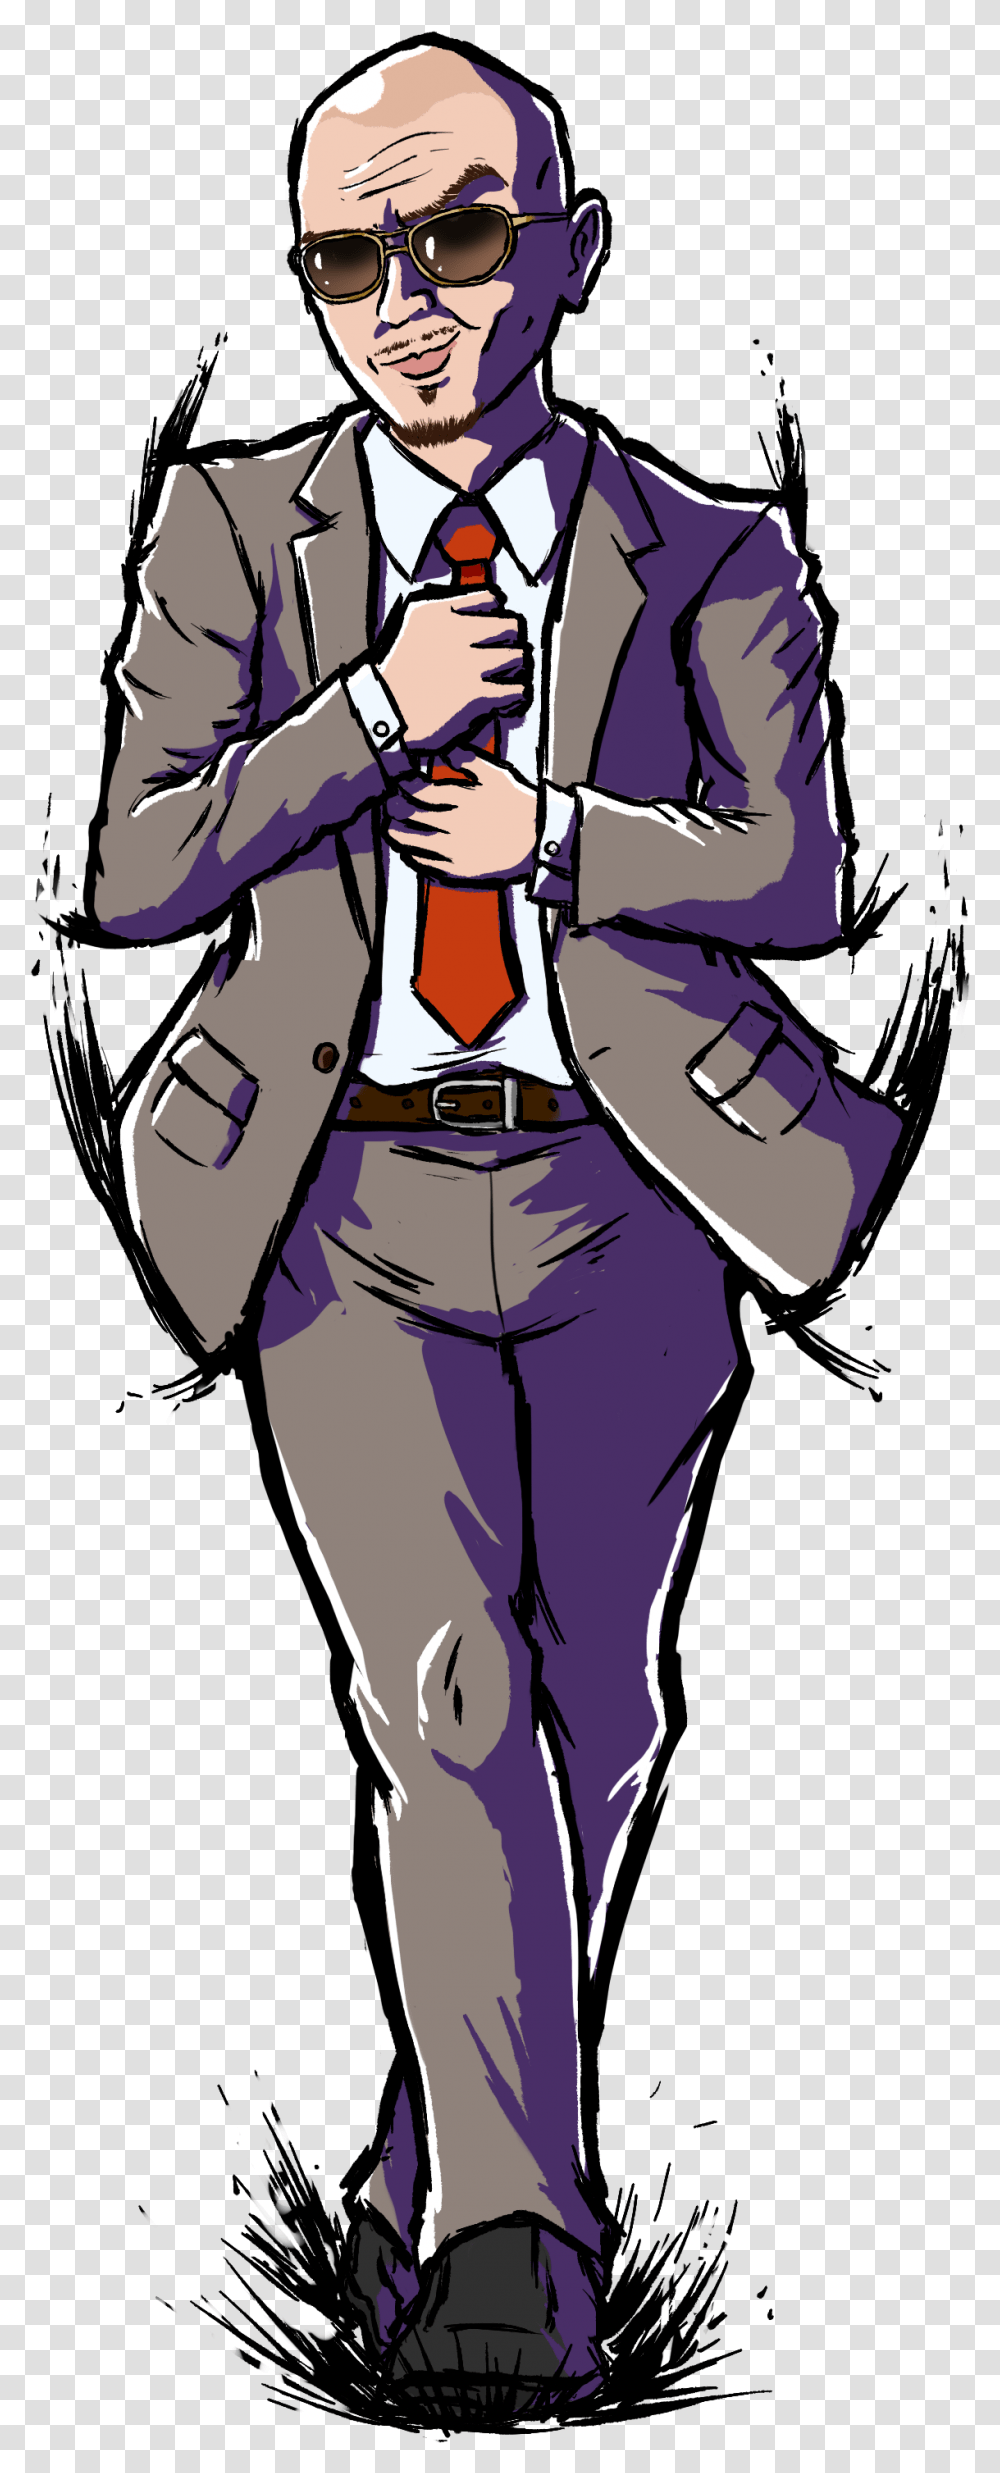 Siivagunner Wiki Siivagunner Pitbull, Person, Sunglasses, Performer, Book Transparent Png